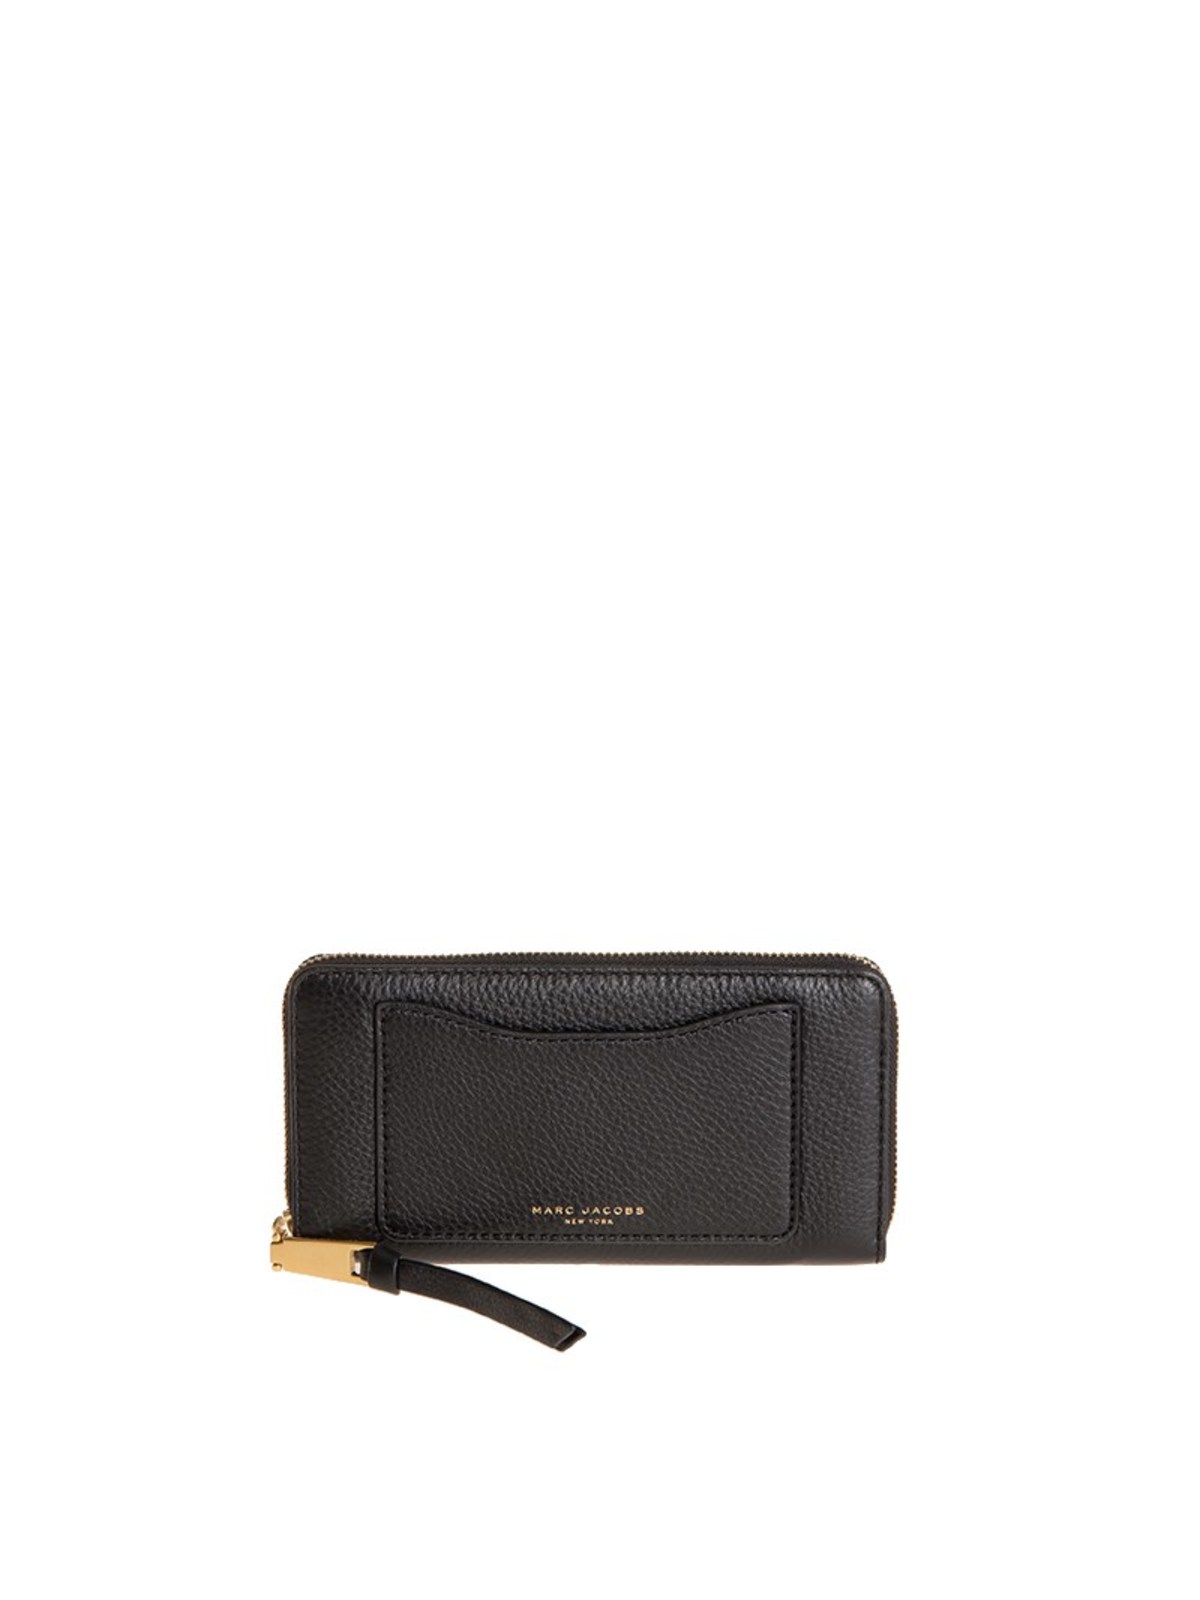 MARC JACOBS HAMMERED LEATHER WALLET